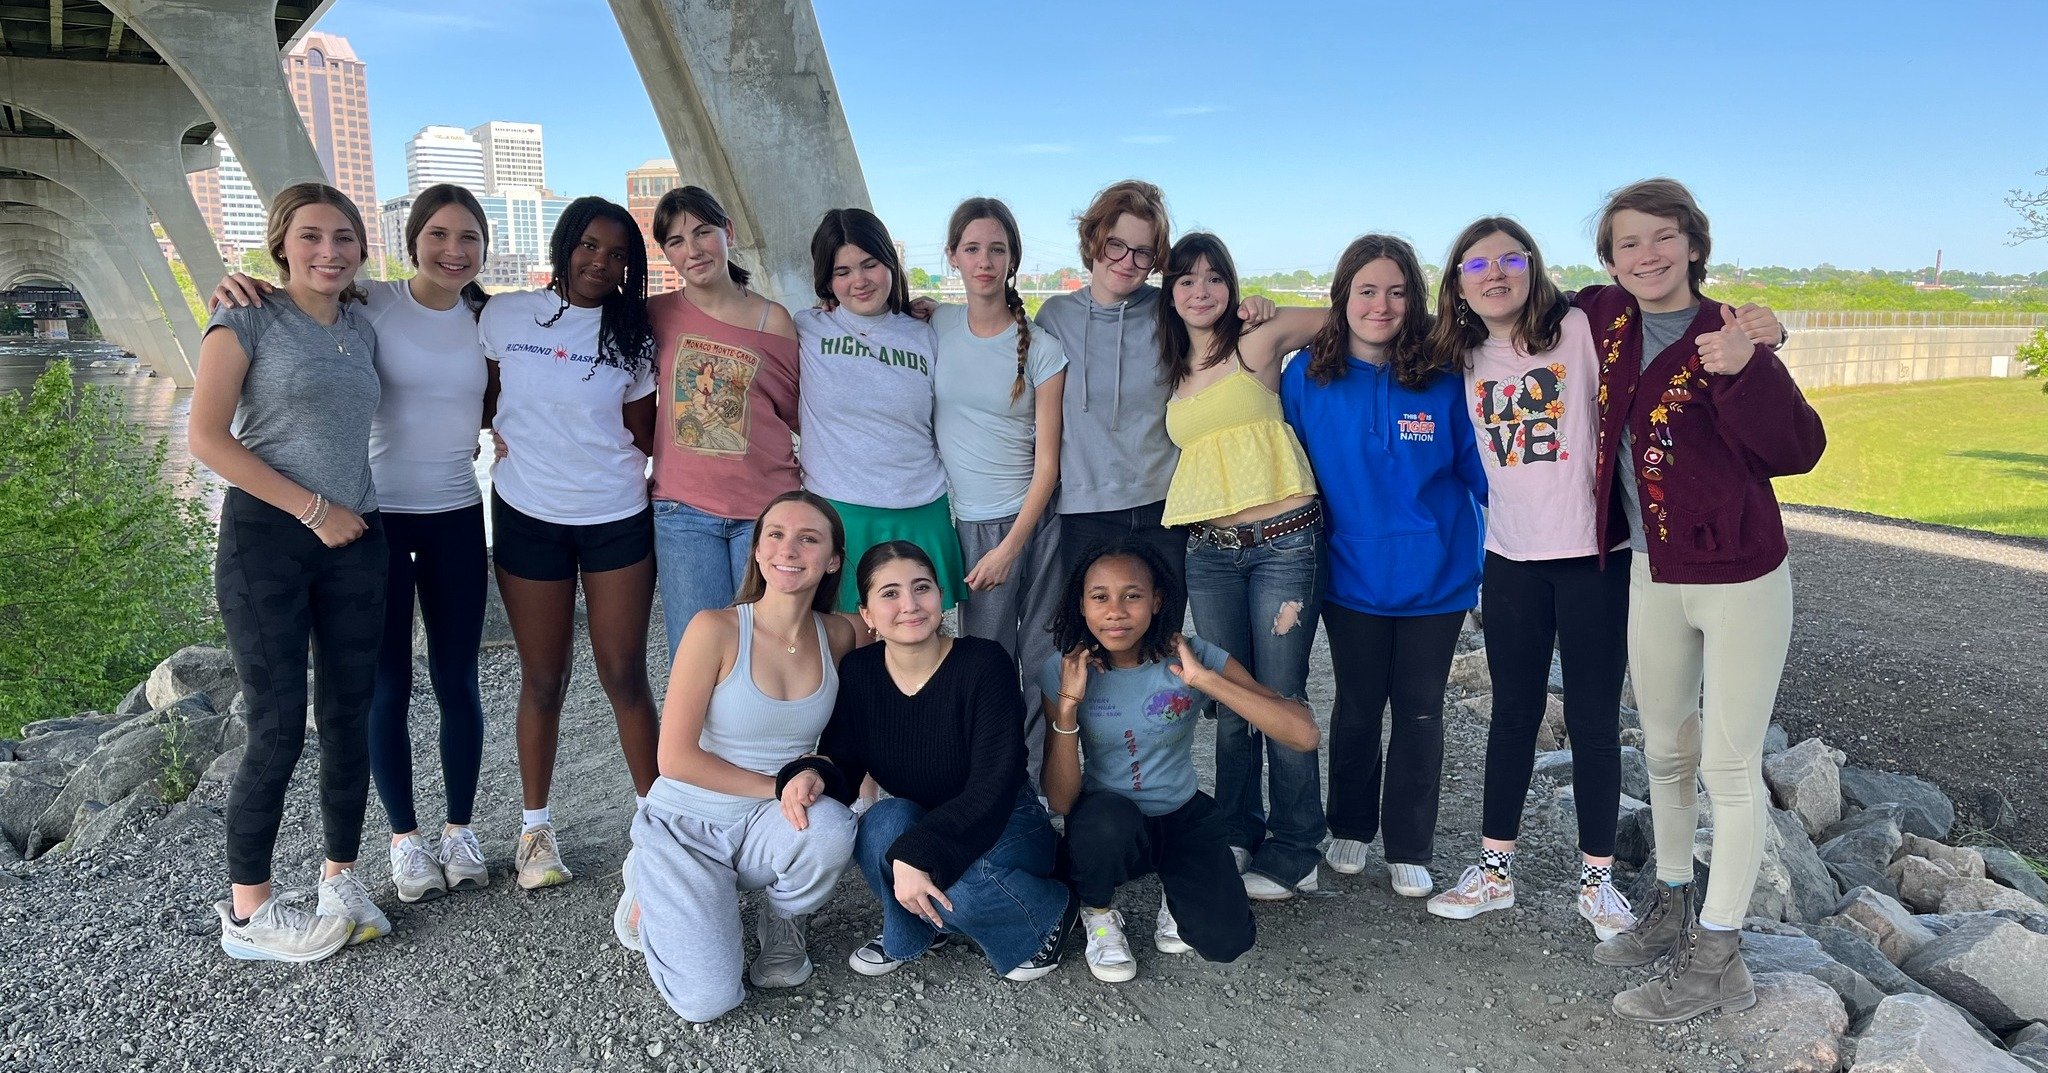 It was a picture-perfect day for an 8th grade PE hike across the Potterfield Bridge and along the floodwall walk on the south side of the James River.